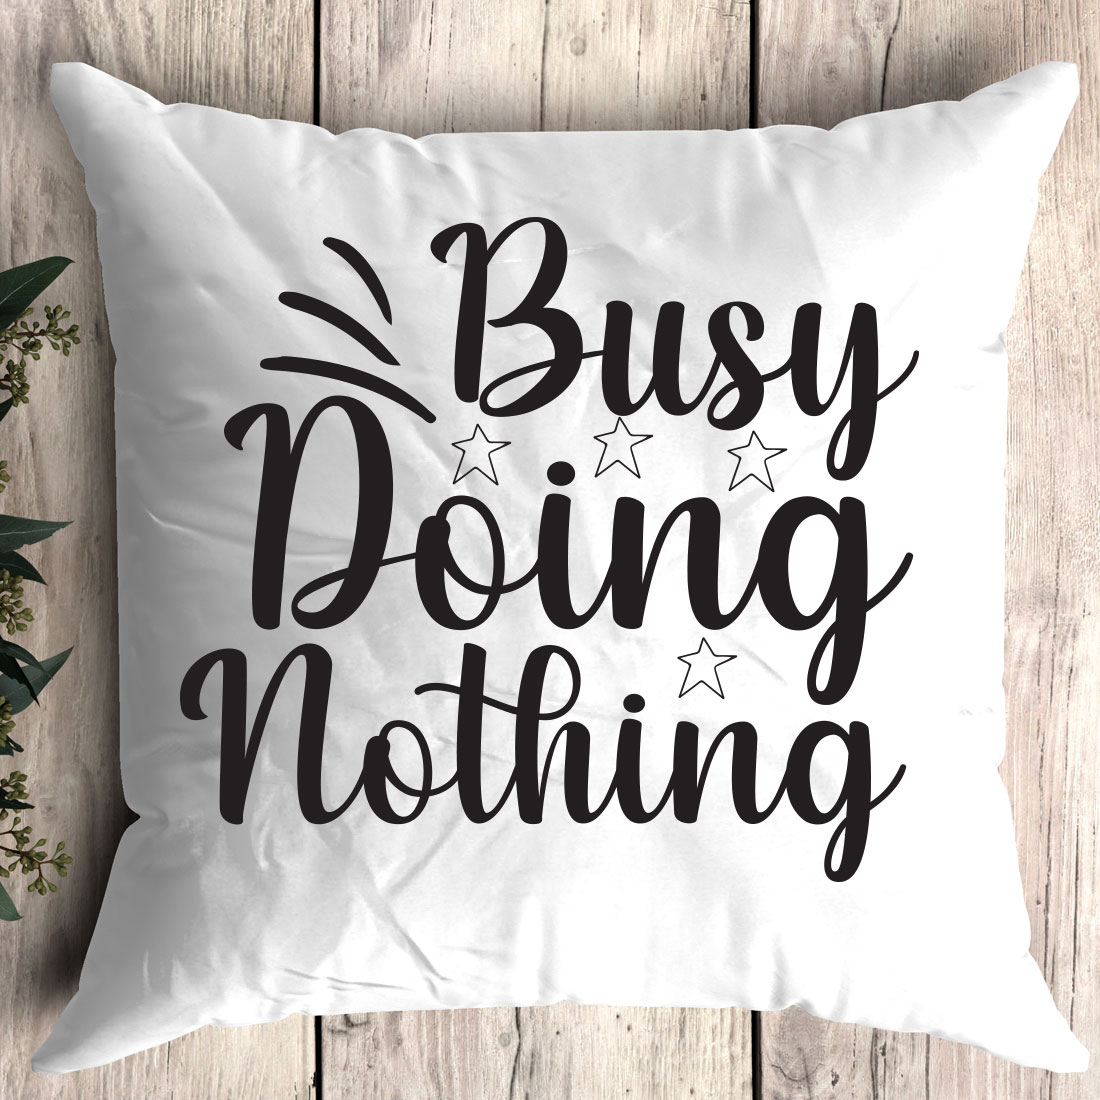 Pillow that says busy doing nothing on it.